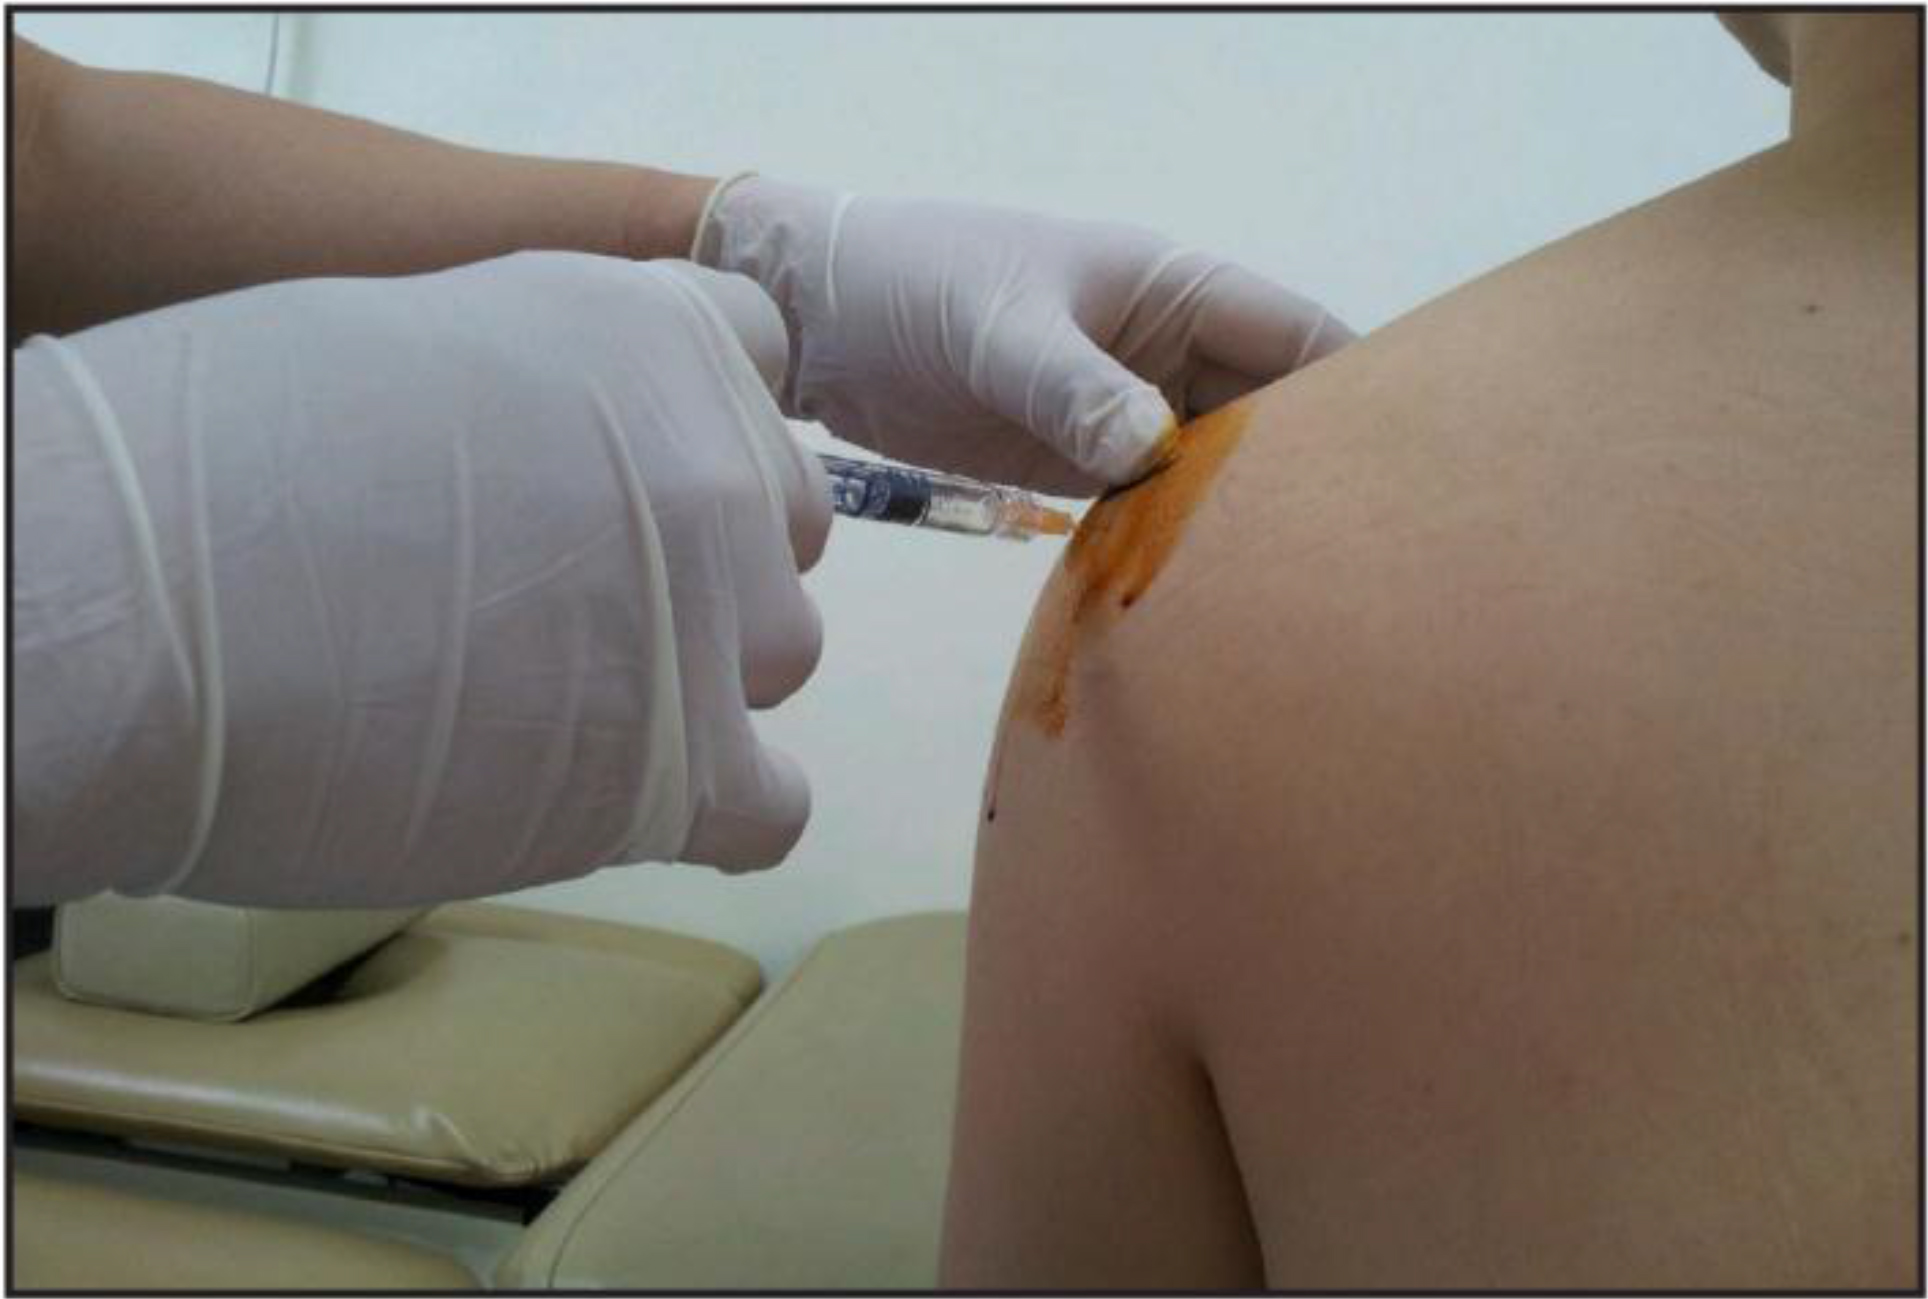 Posterior technique for shoulder intra-articular injection.